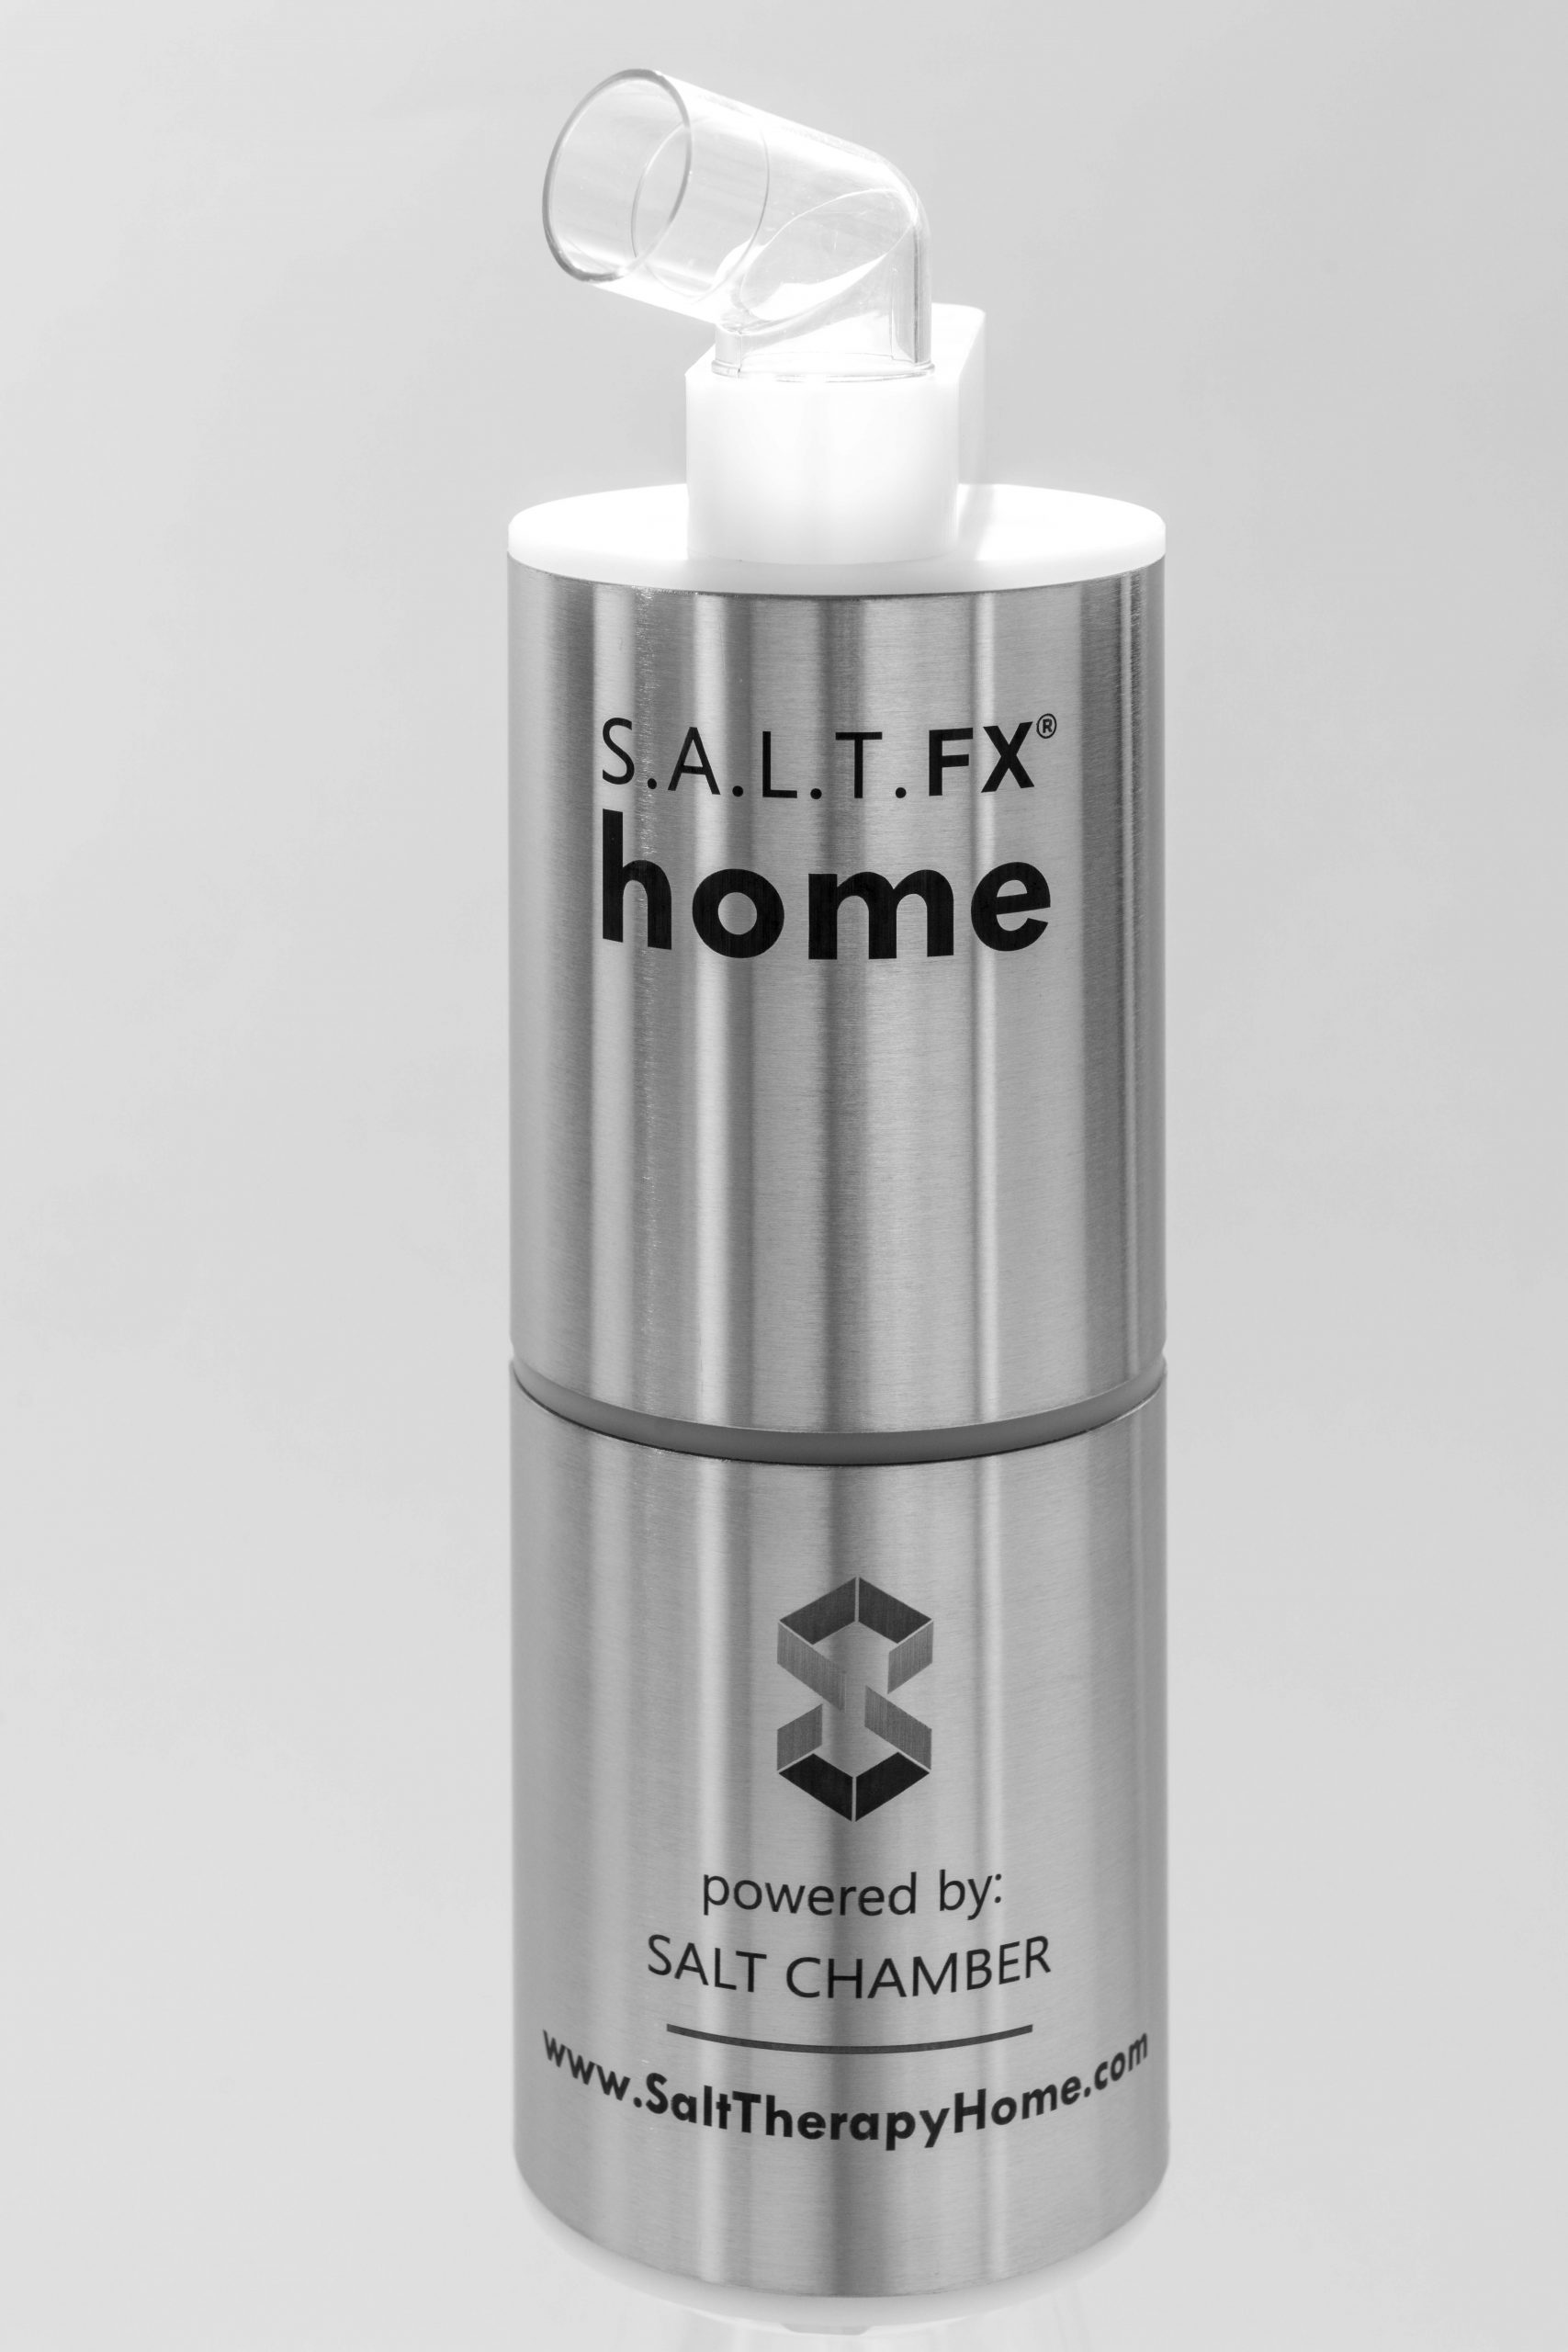 Salt Therapy Home Website Main Product Picture 102120 Scaled